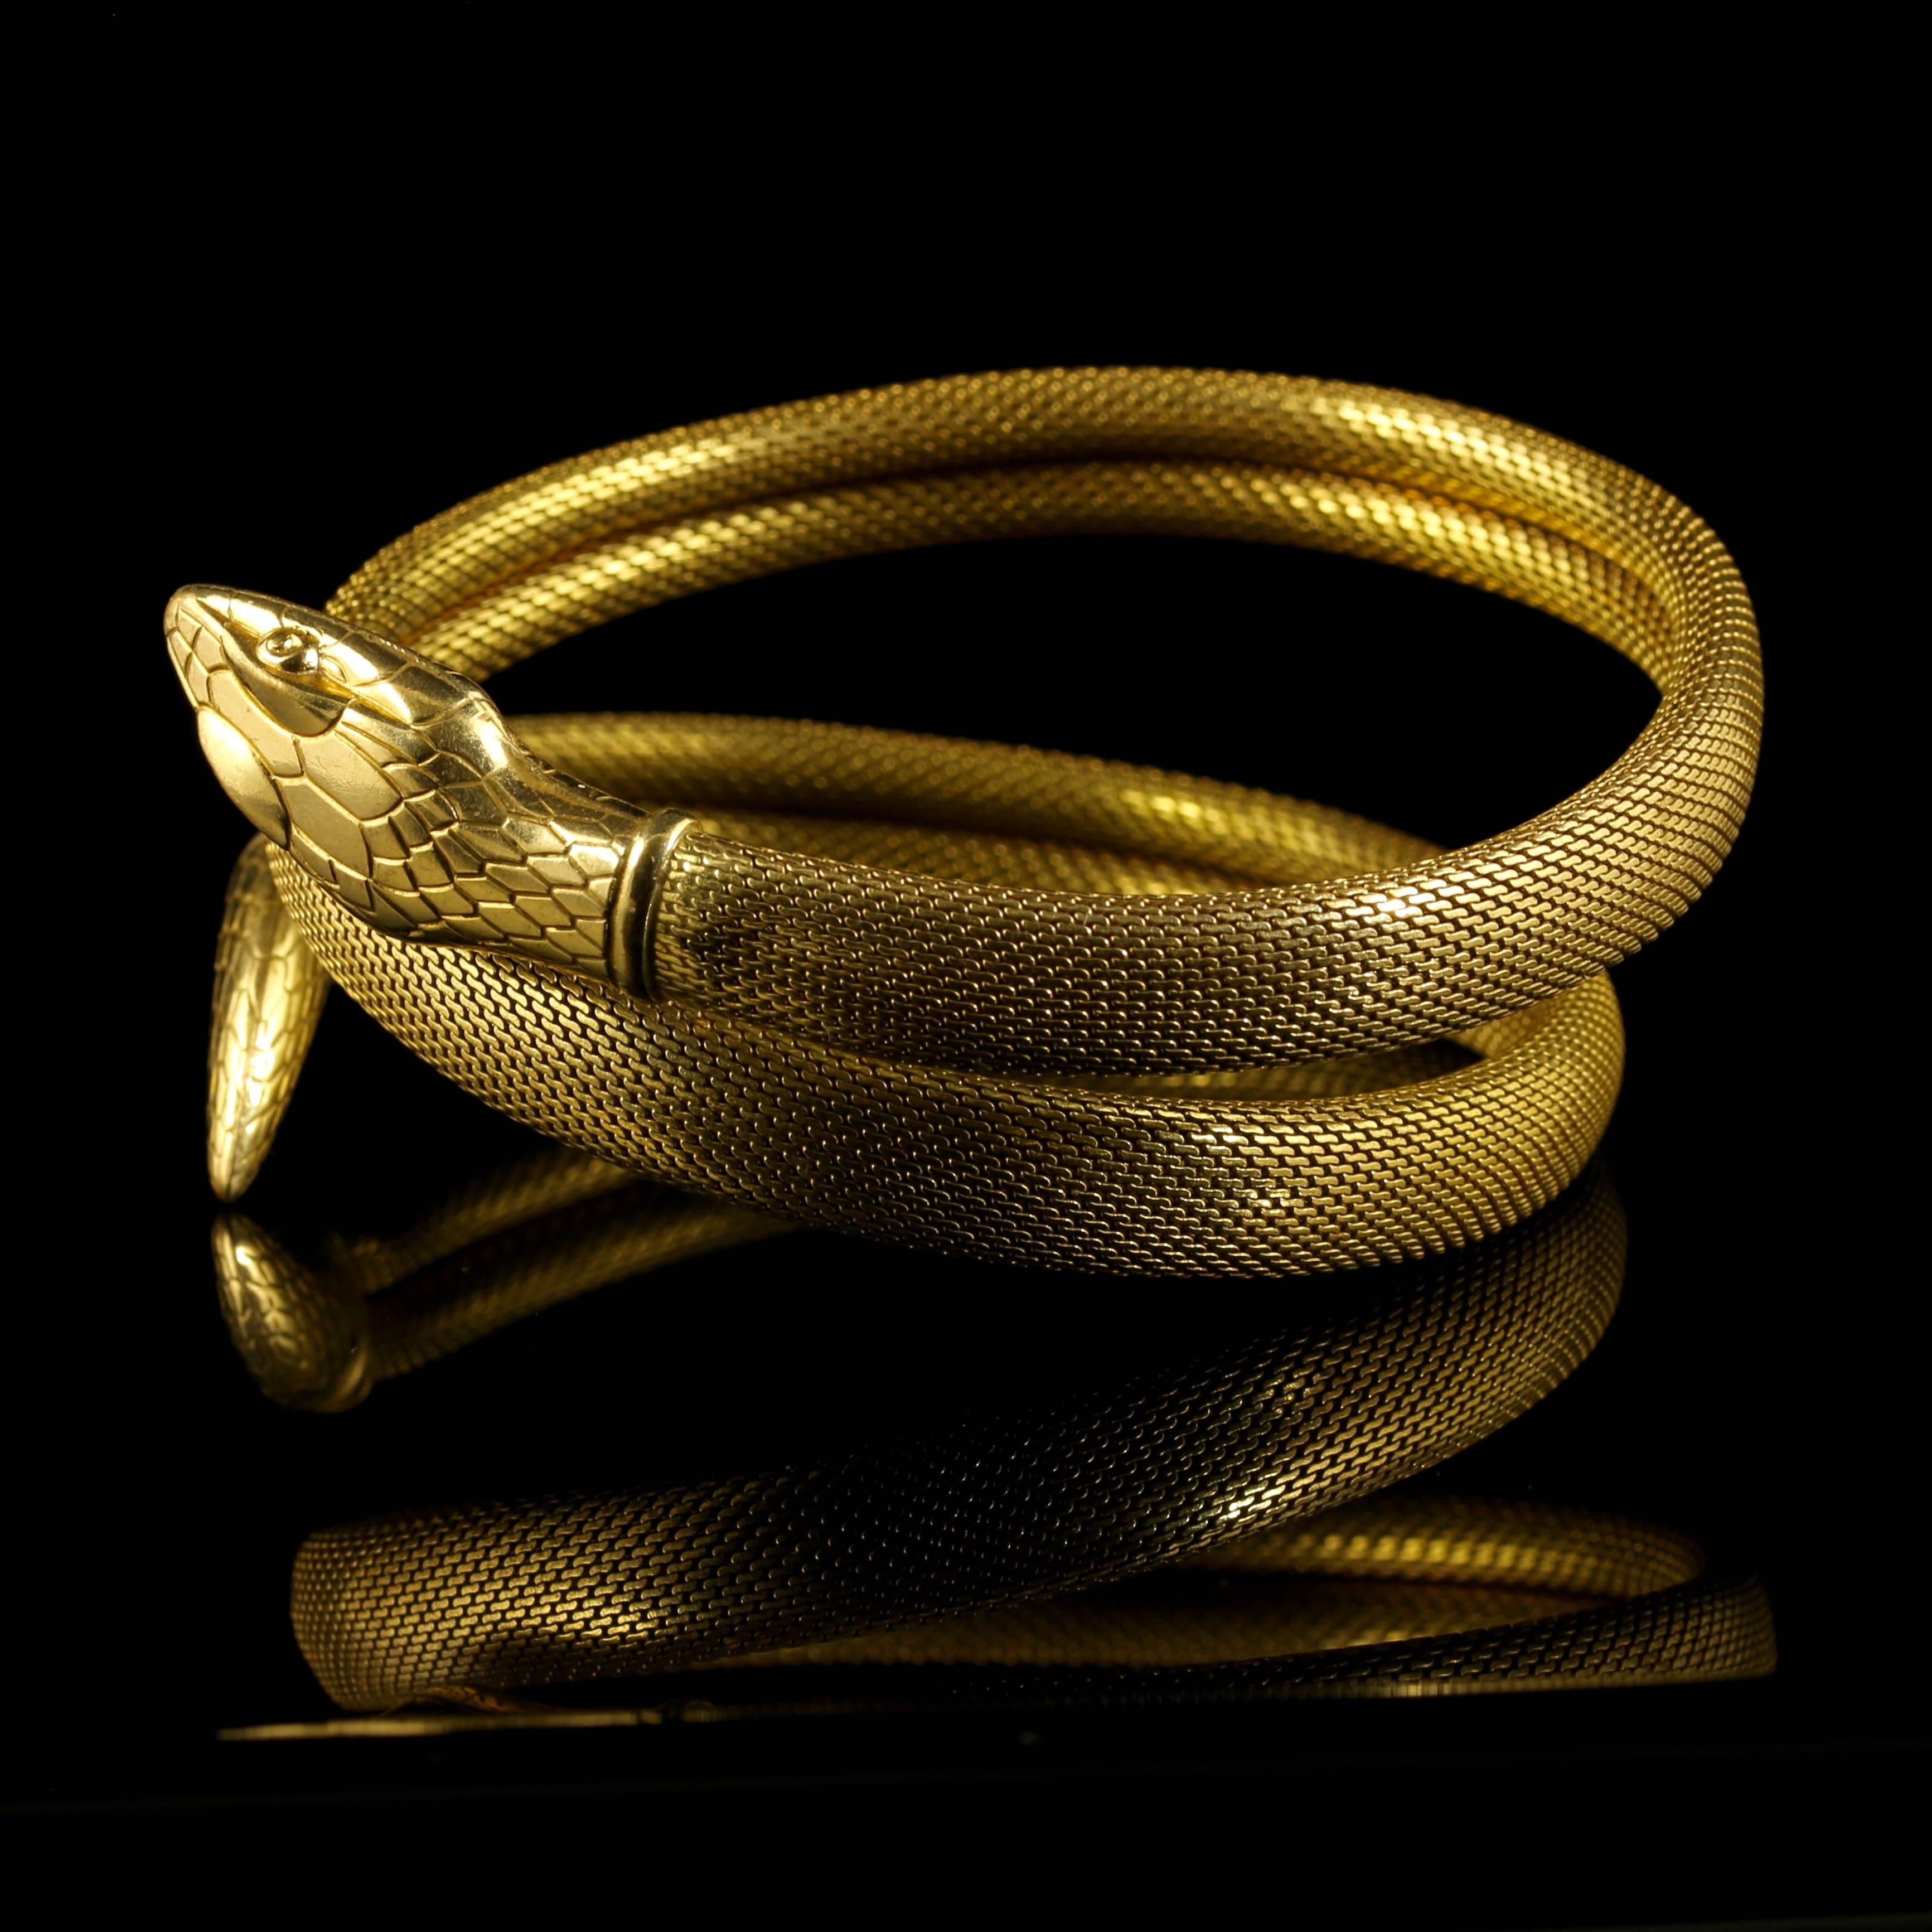 This genuine Victorian striking serpent bangle is Circa 1900

Set in silver and gilded in 18ct yellow gold.

Beautiful all round workmanship with engraved head and tail with a mesh body.

This beautiful bangle can be worn as a slave bangle or on the